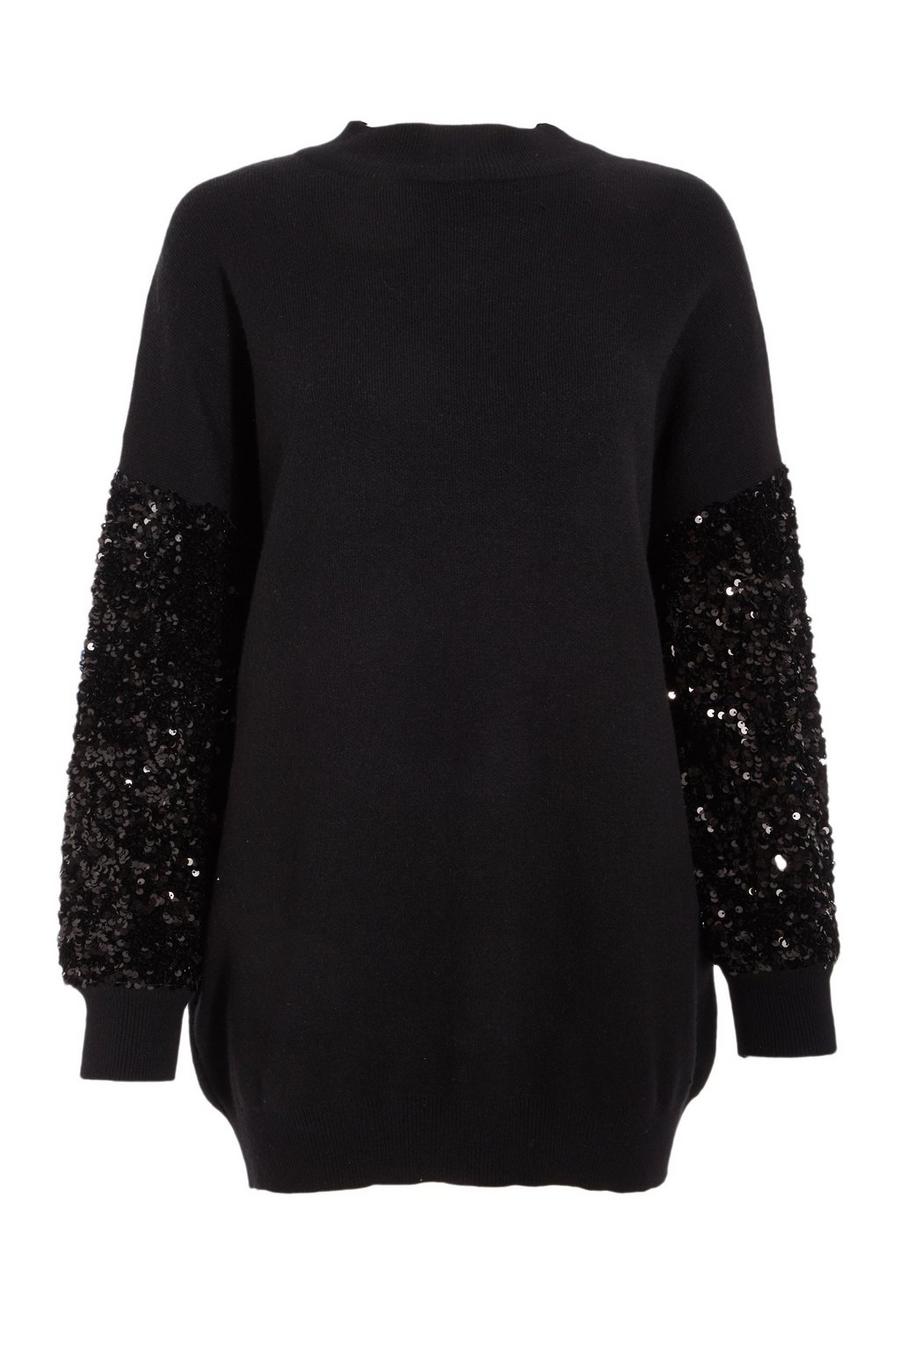 brand new Quiz quiz black jumper with sequined sleeves size L fit 14-16 up to 18 